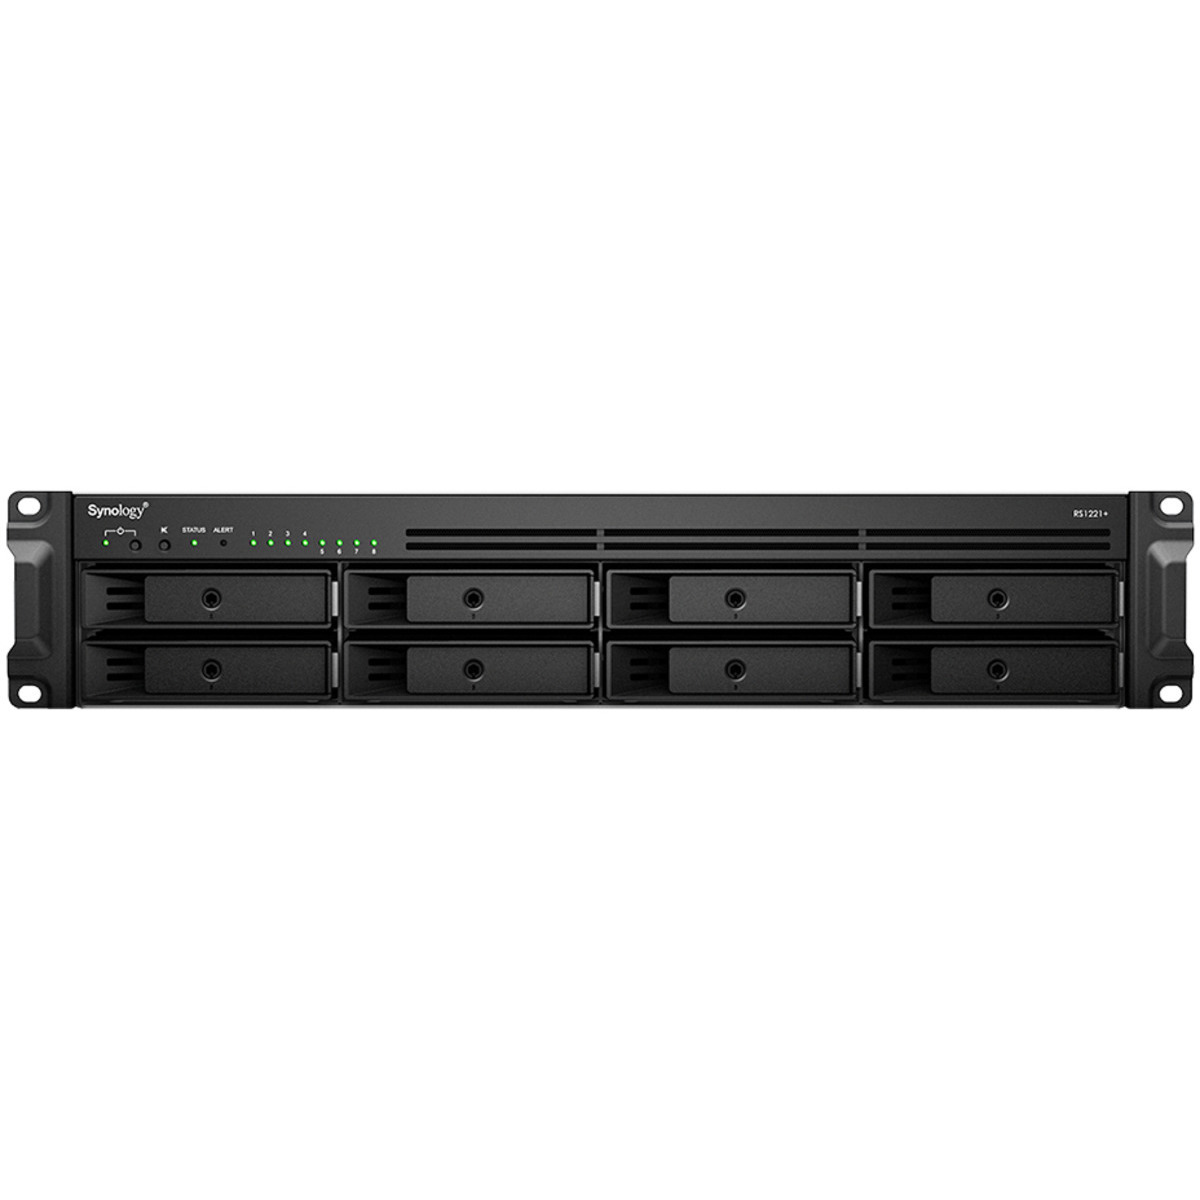 Synology RackStation RS1221+ 32tb 8-Bay RackMount Multimedia / Power User / Business NAS - Network Attached Storage Device 4x8tb Toshiba Enterprise Capacity MG08ADA800E 3.5 7200rpm SATA 6Gb/s HDD ENTERPRISE Class Drives Installed - Burn-In Tested RackStation RS1221+